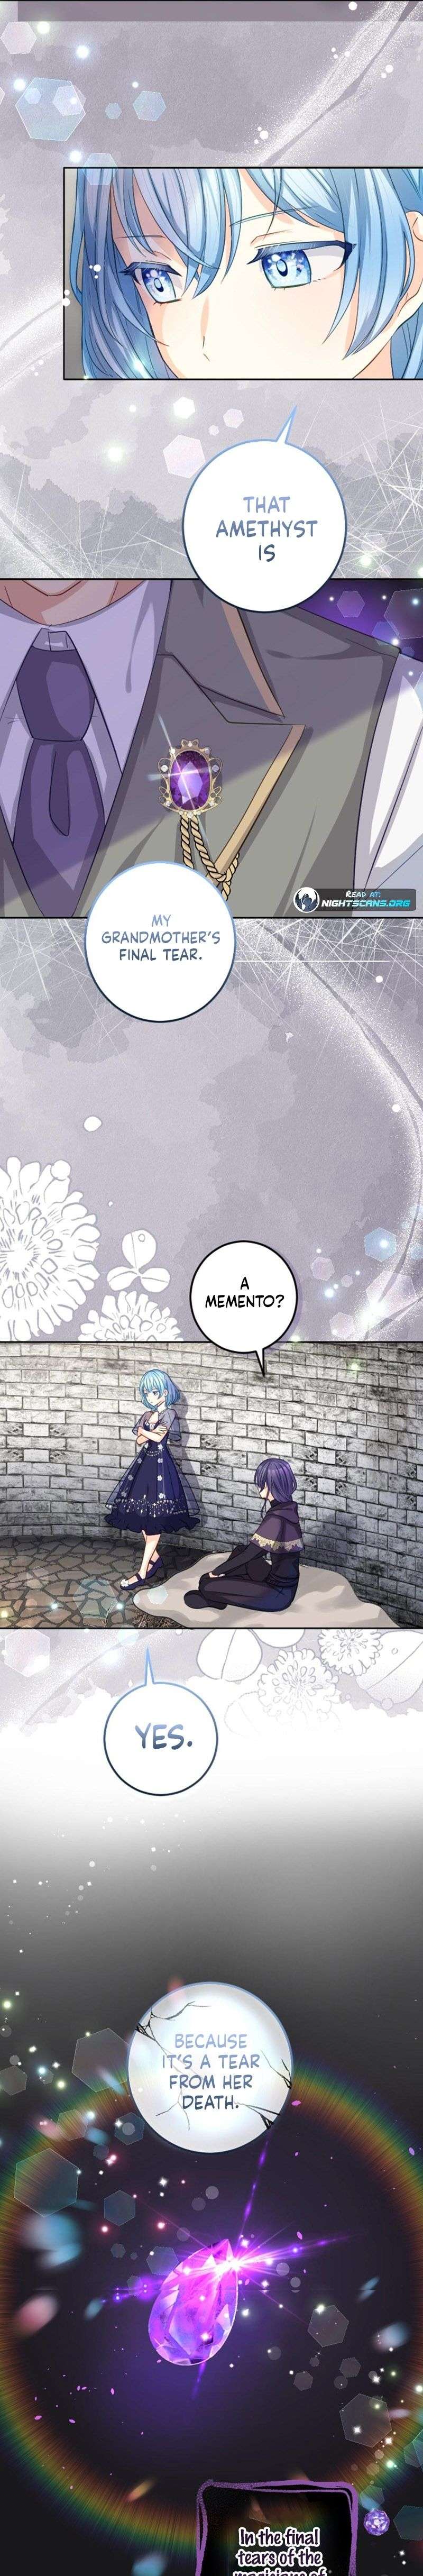 The Precious Girl Does Not Shed Tears - chapter 10 - #4